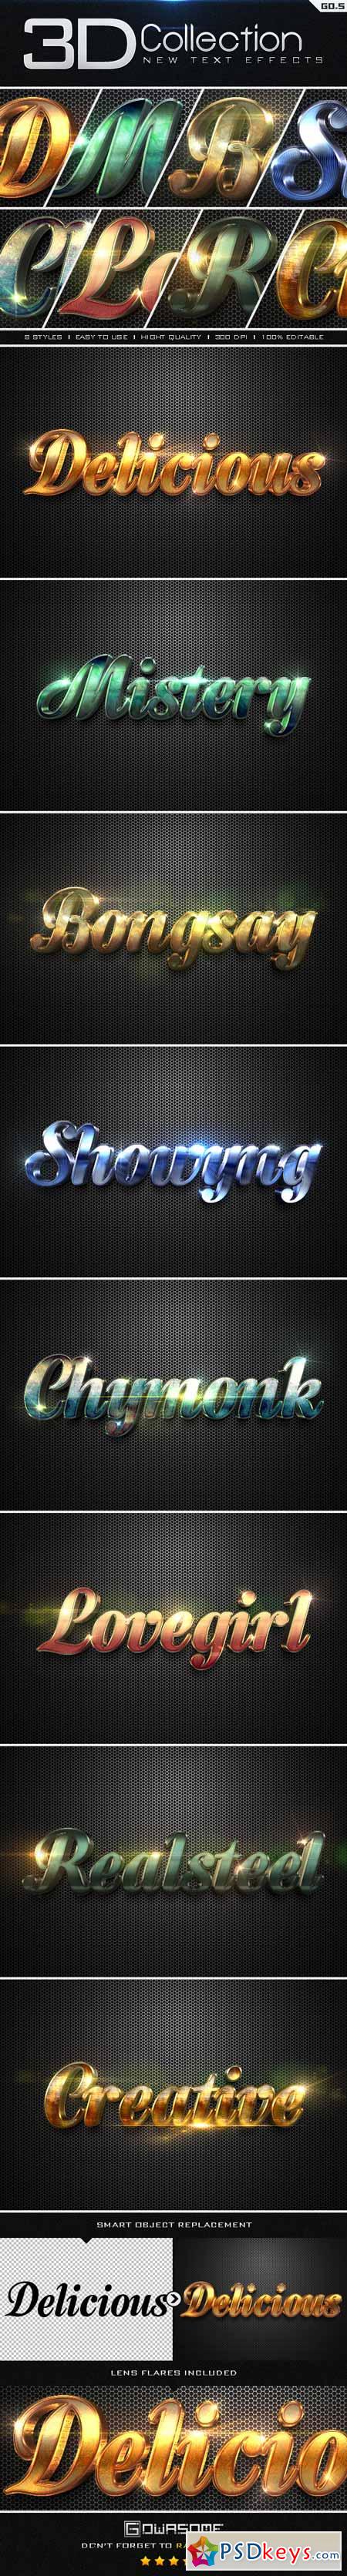 New 3D Collection Text Effects GO.5 9693996